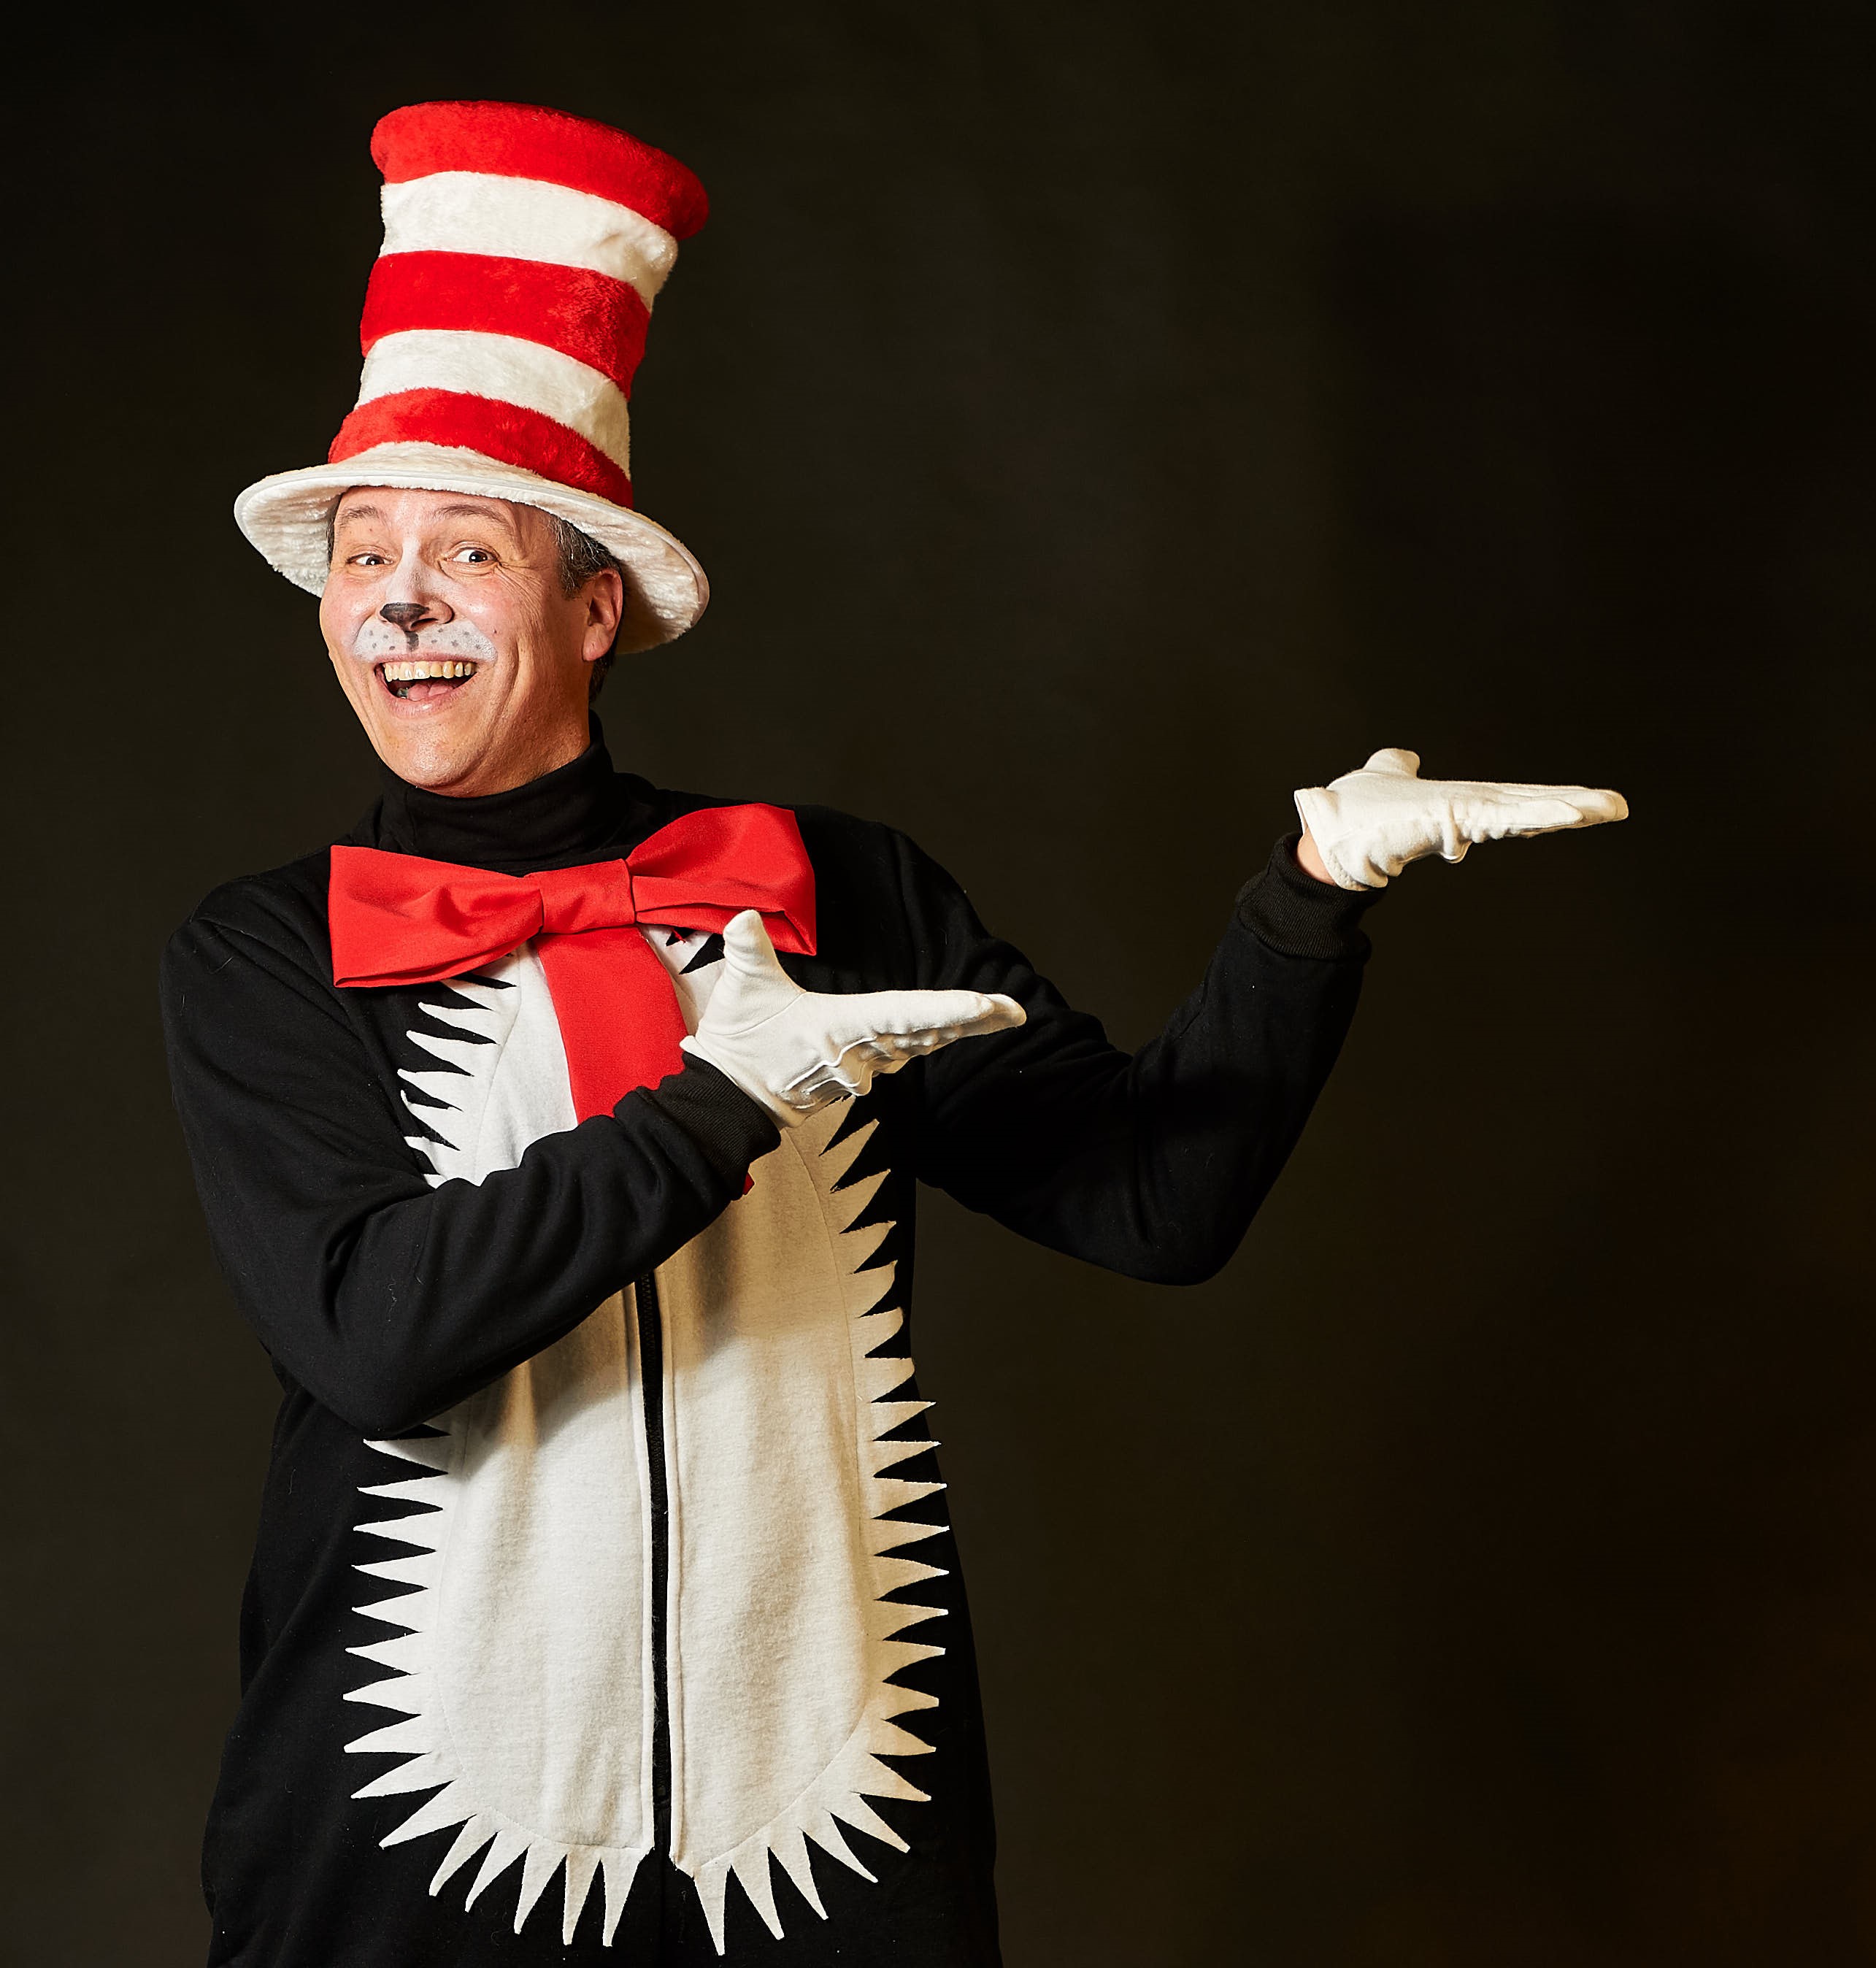 Woodland Opera House | The Woodland Opera House presents The Cat in the Hat